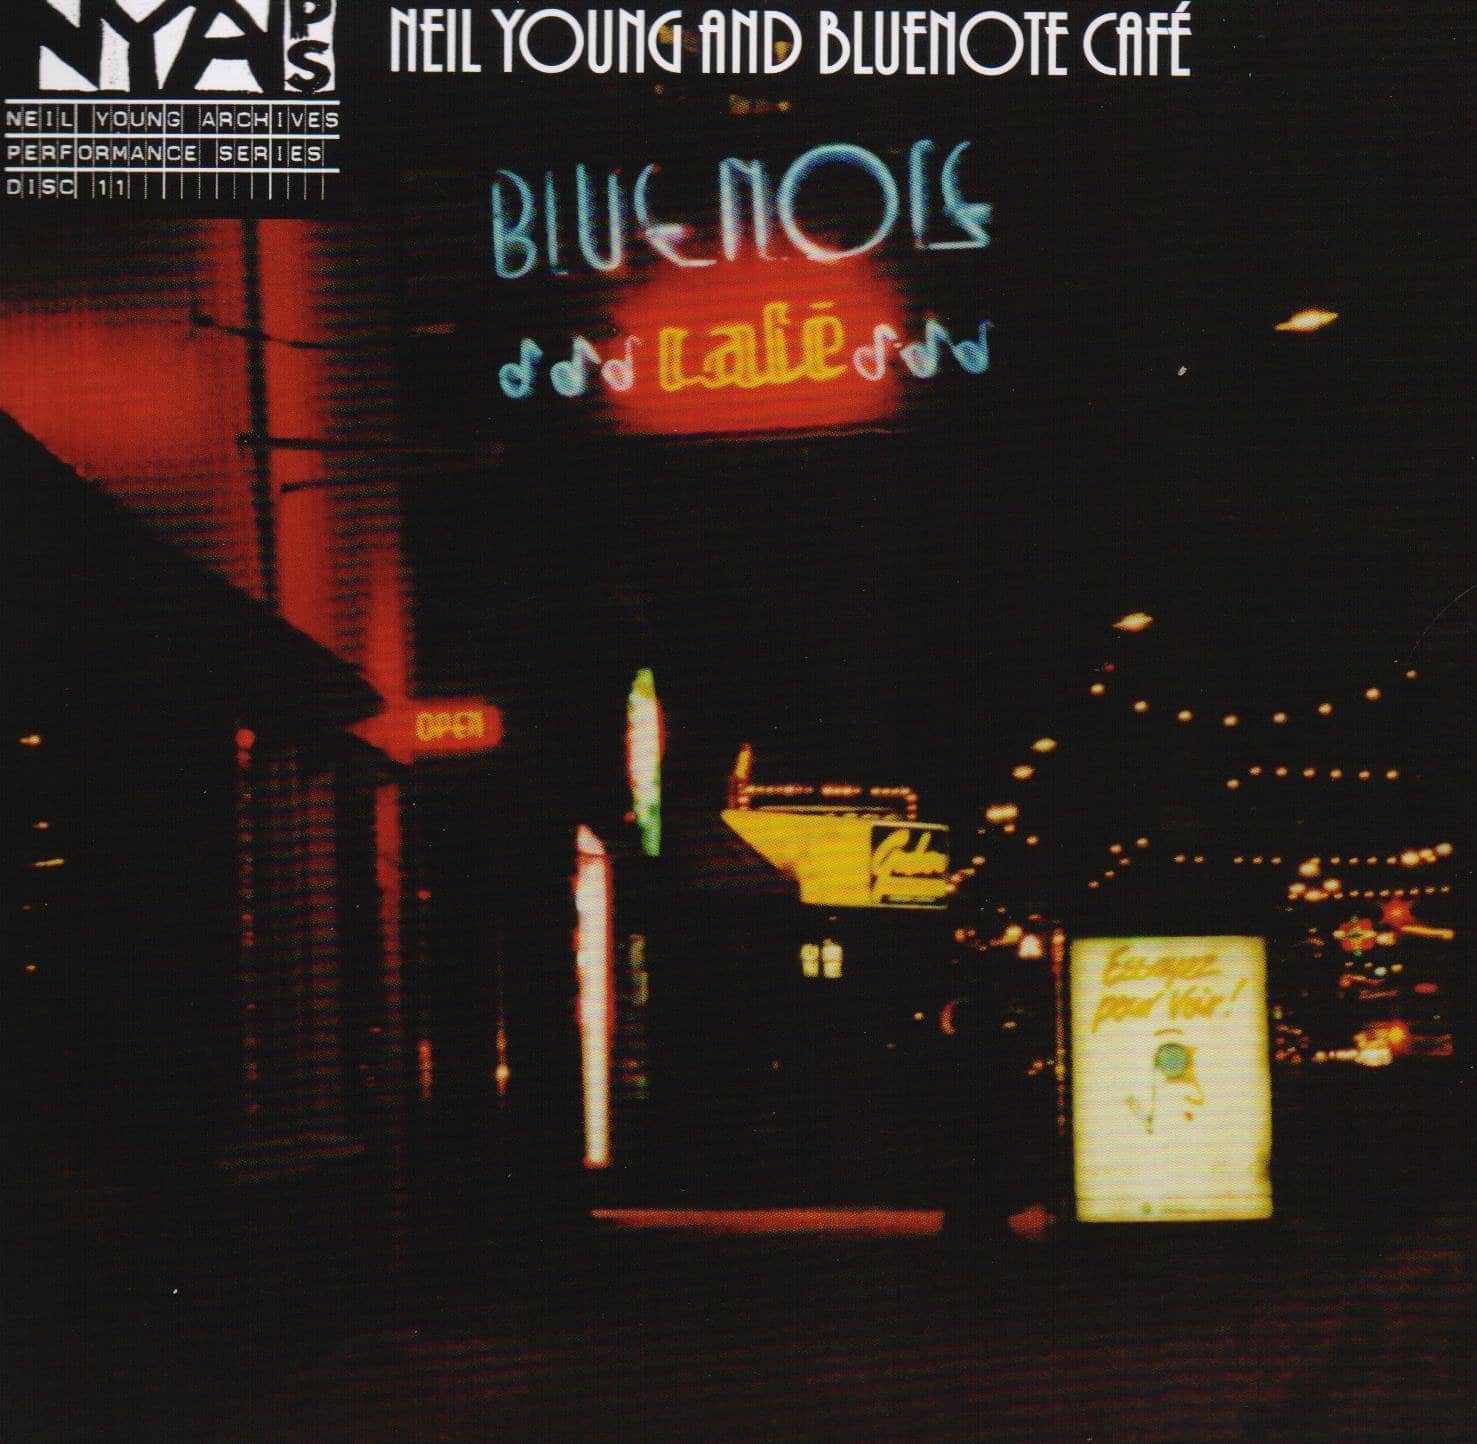 Neil Young and Bluenote Cafe: Bluenote Cafe